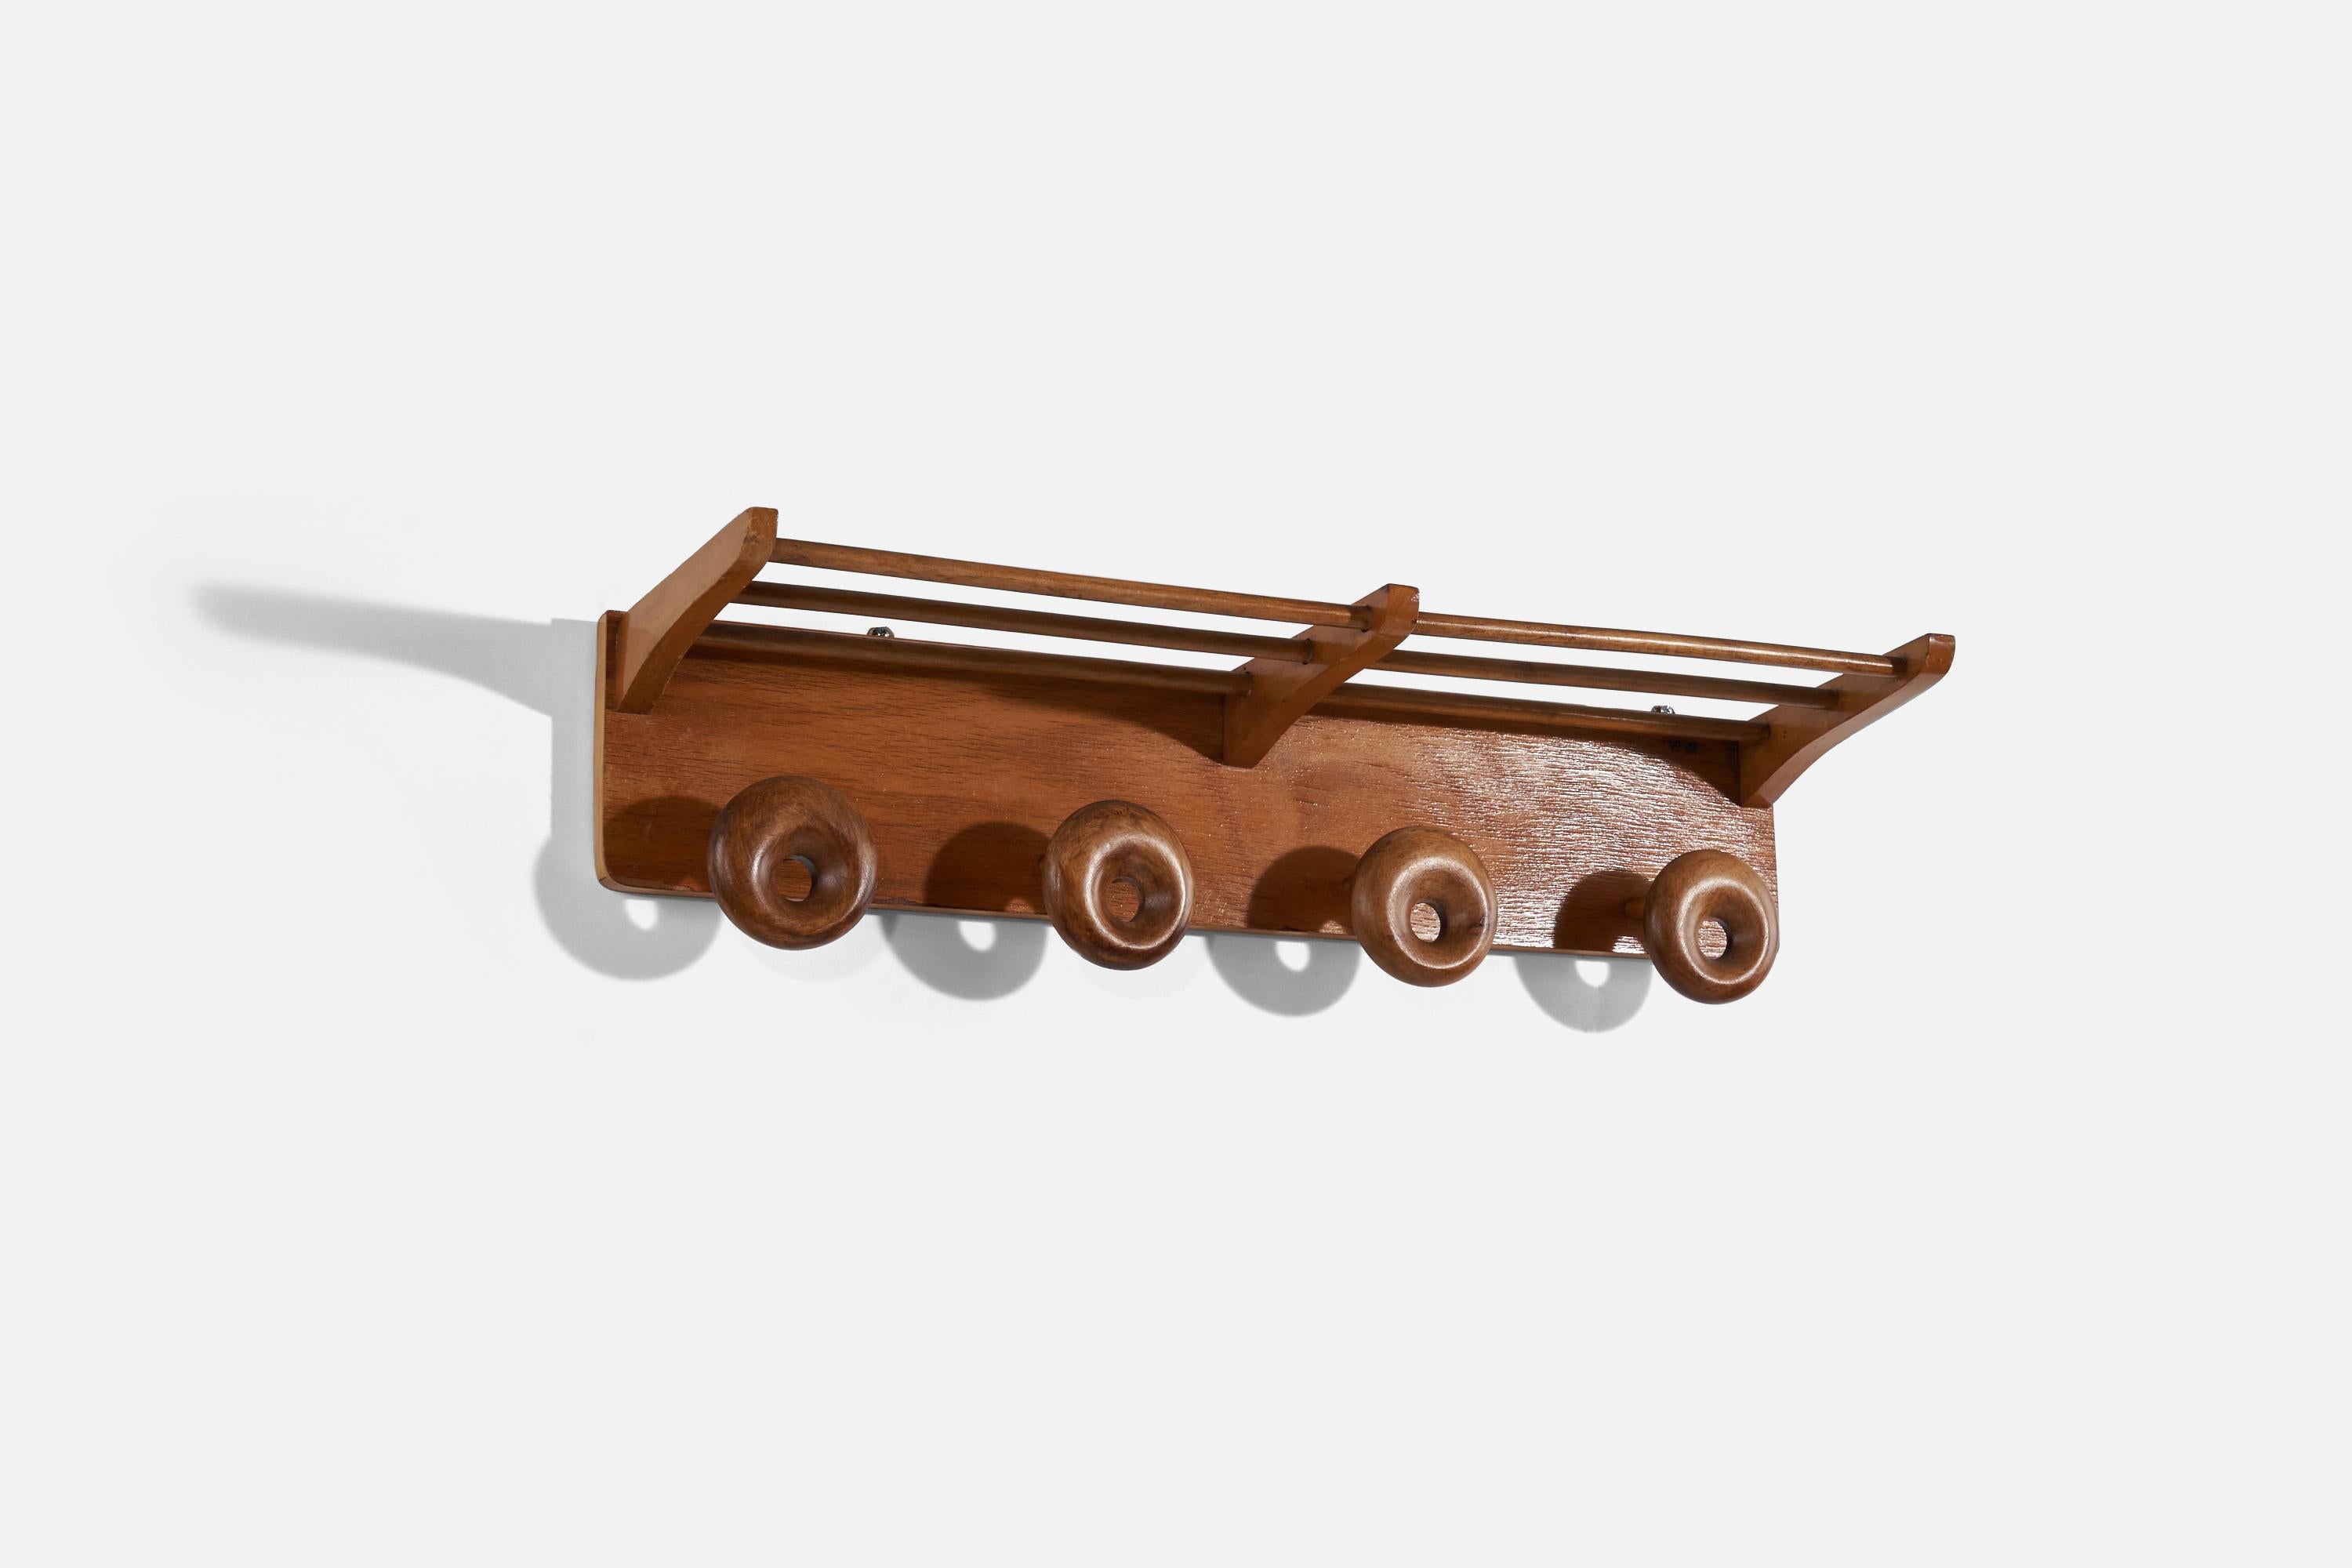 A wood coat rack designed and produced by an Italian designer, Italy, 1950s.